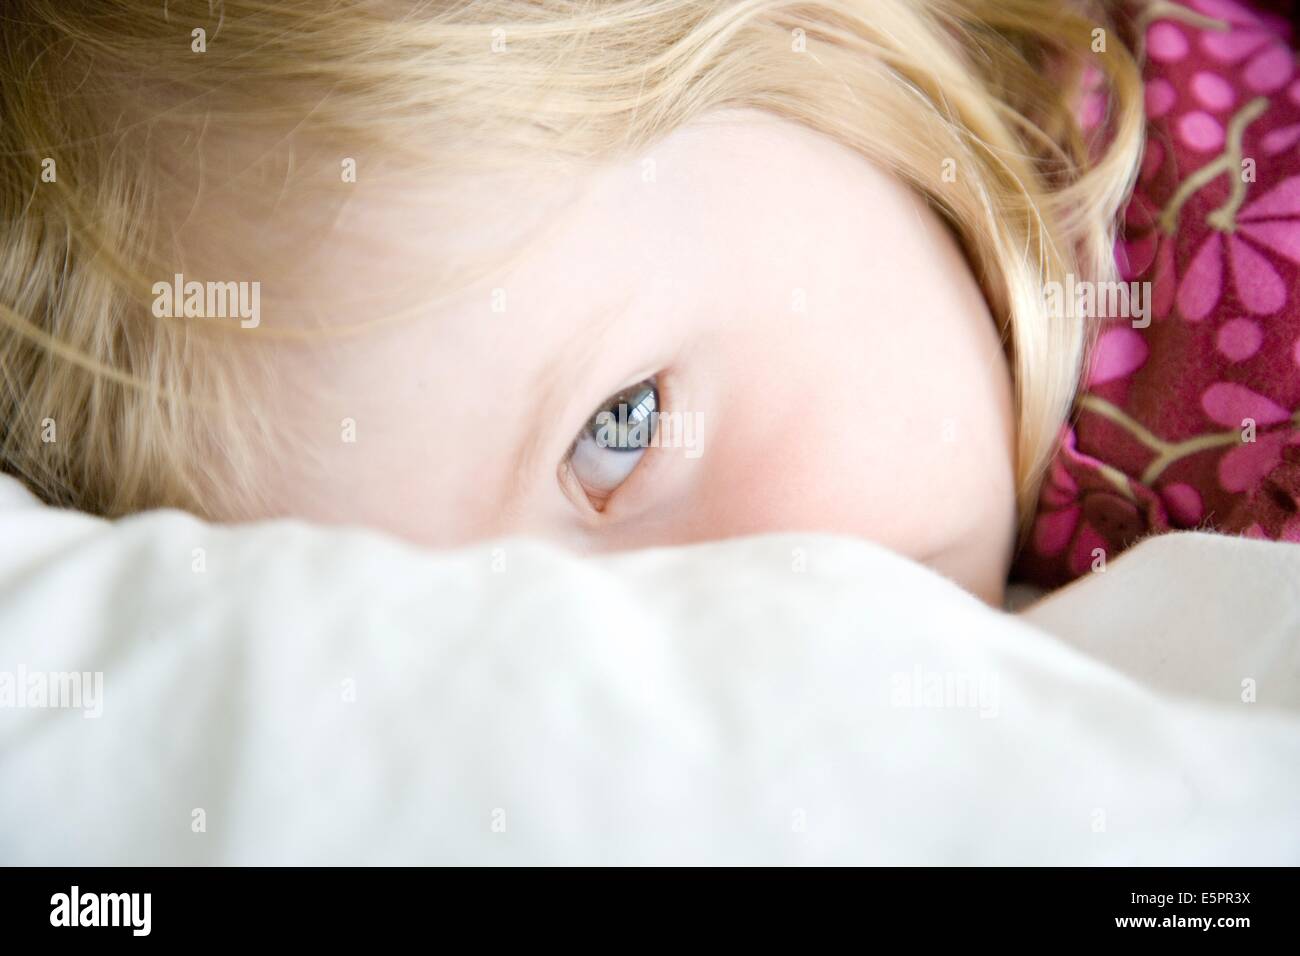 2 year old baby girl. Stock Photo